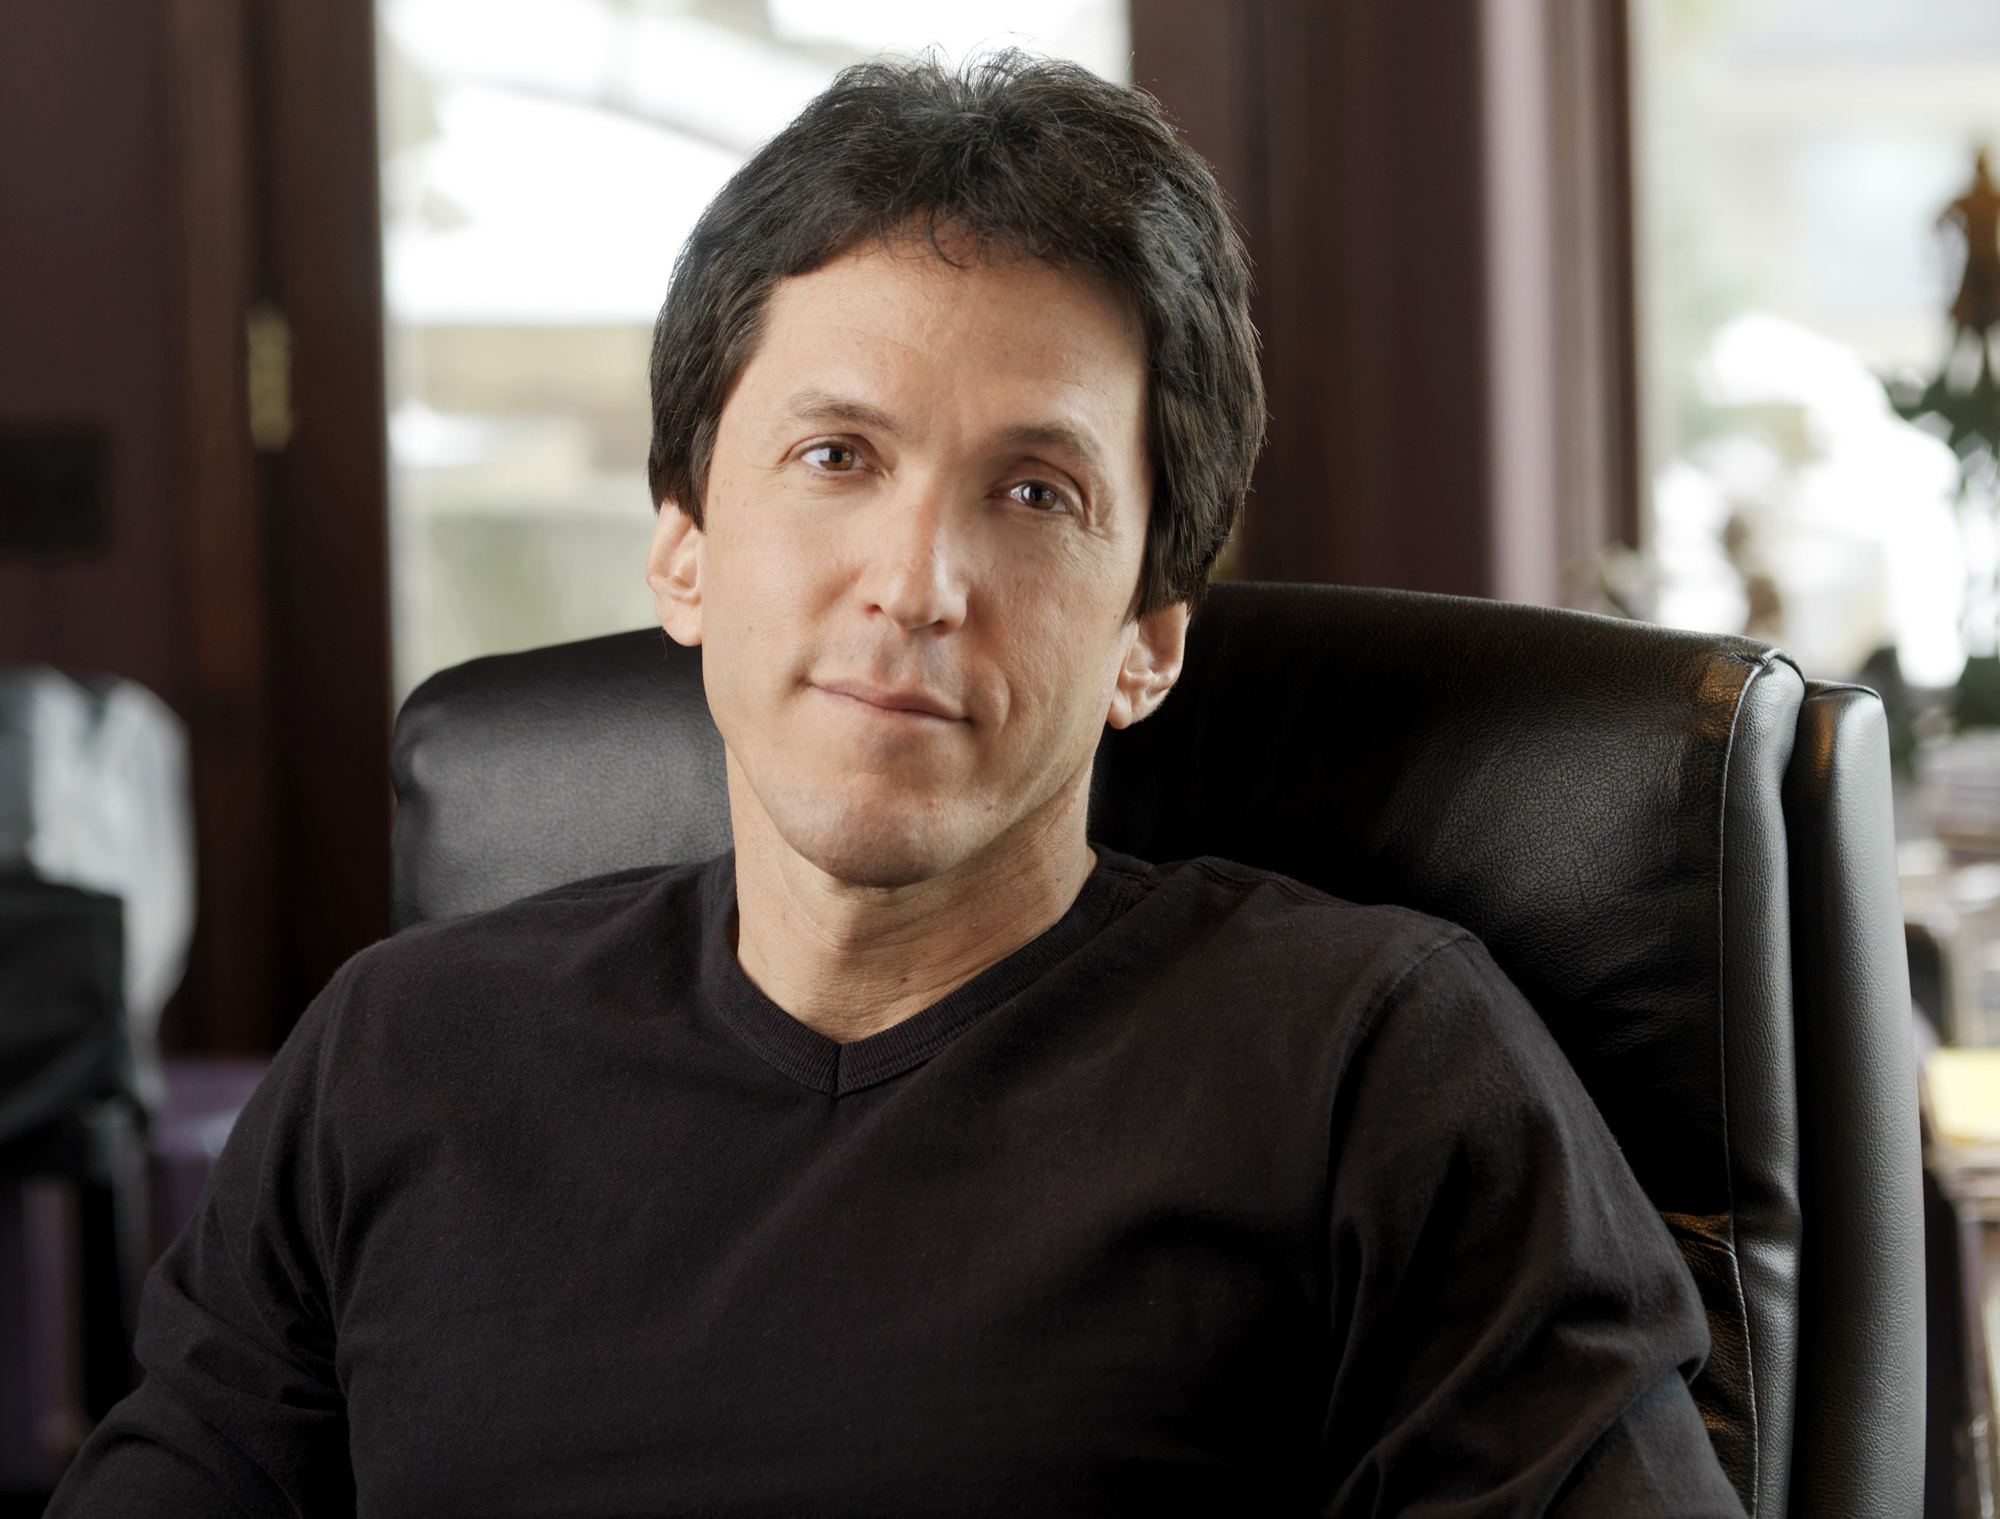 Bestselling author Mitch Albom speaks and signs books at Theater at